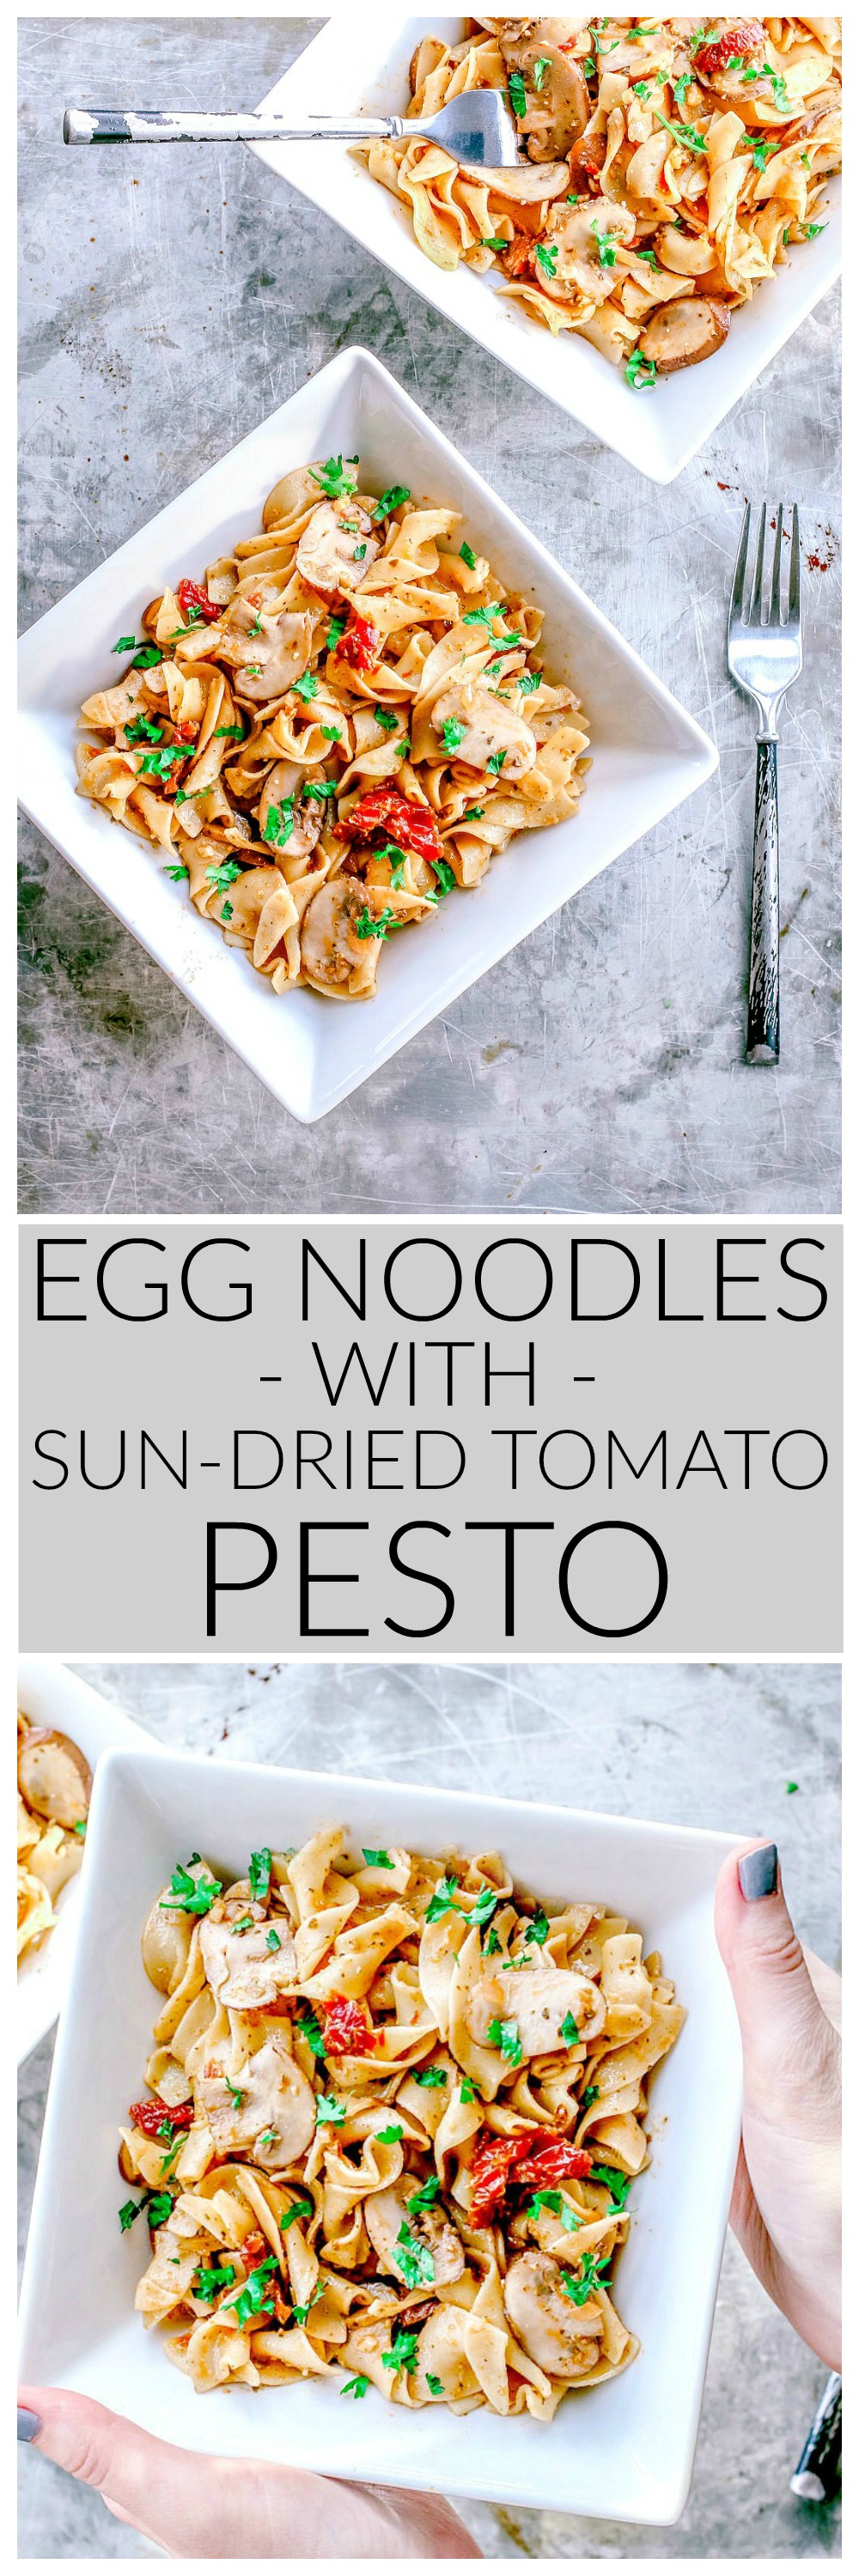 Egg Noodles With Sun-Dried Tomato Pesto and Mushrooms | Killing Thyme